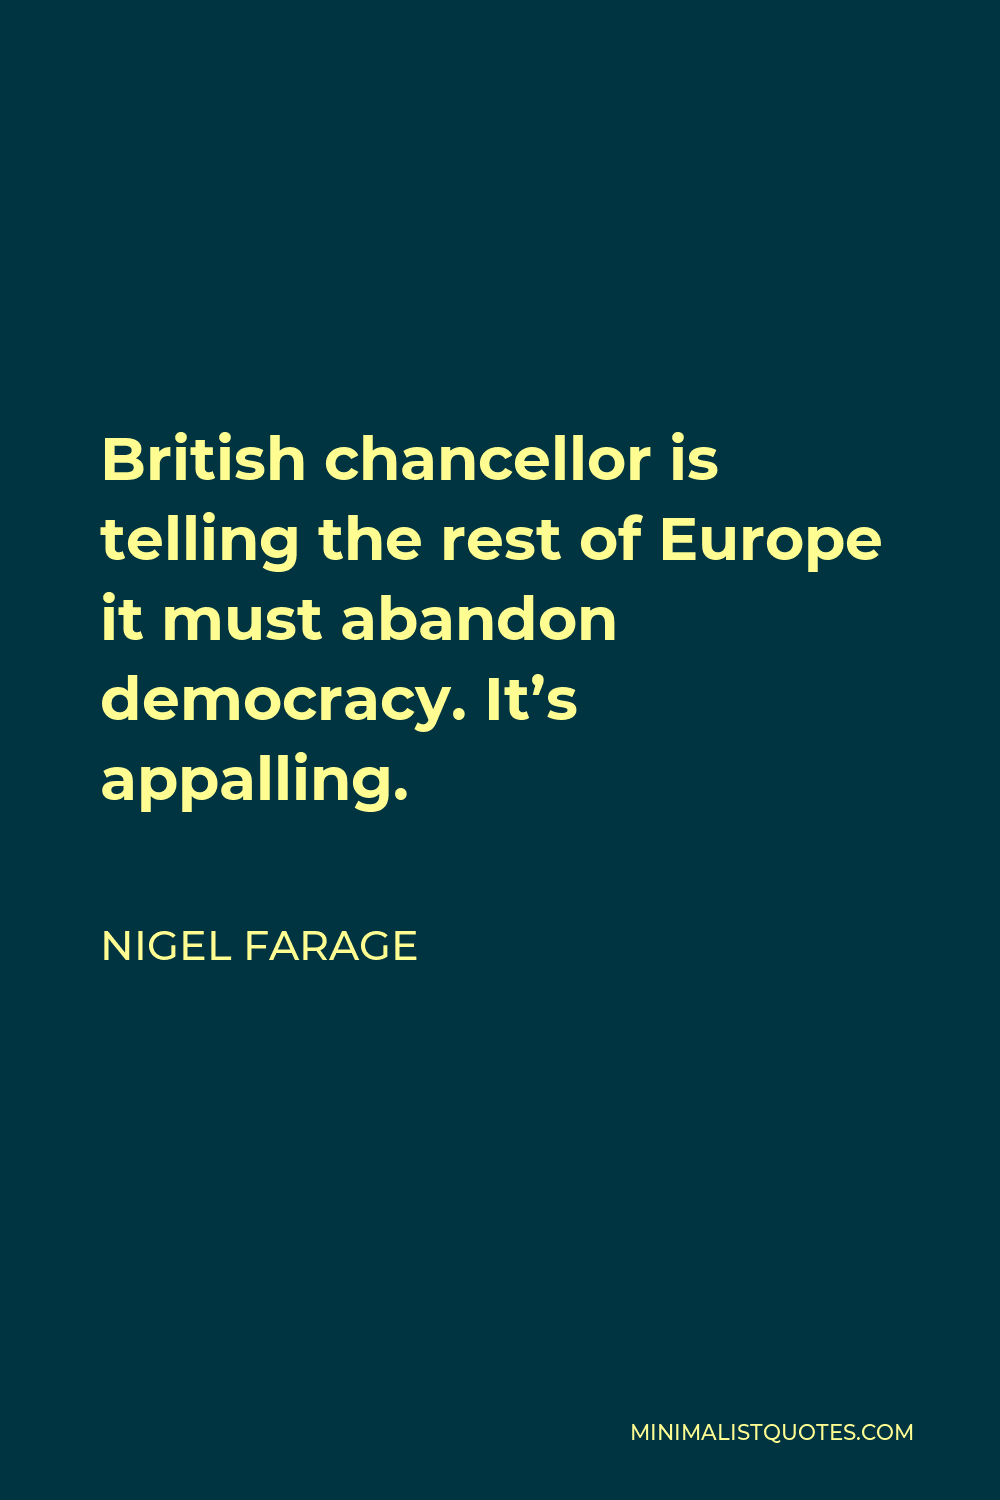 Nigel Farage Quote - British chancellor is telling the rest of Europe it must abandon democracy. It’s appalling.